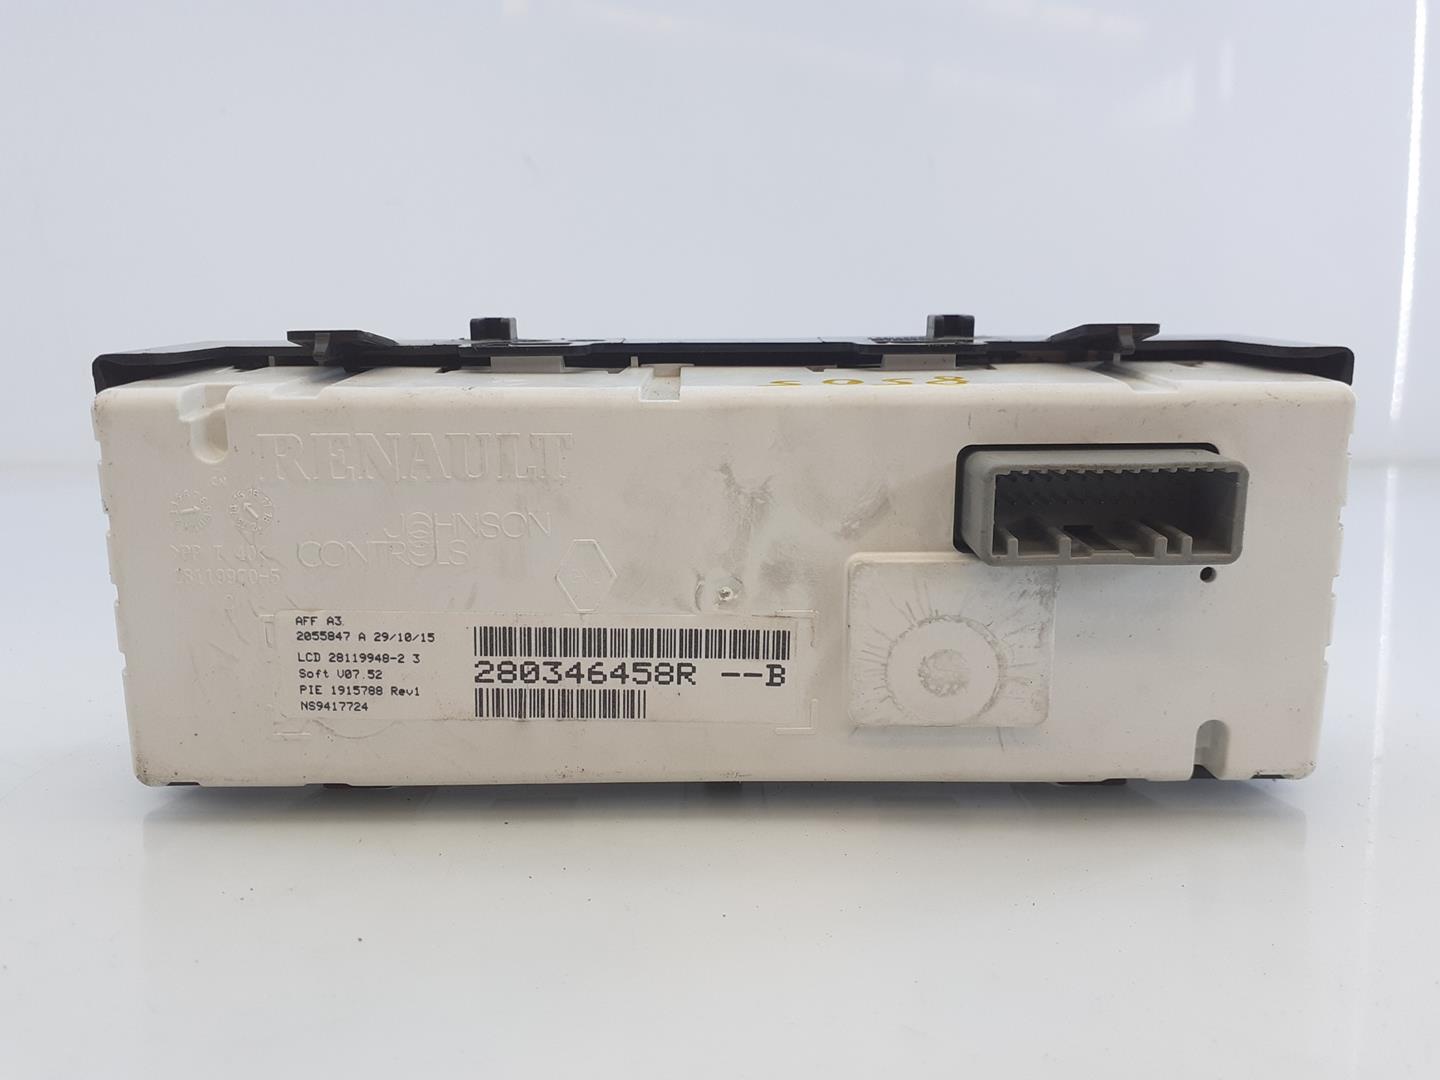 RENAULT Megane 3 generation (2008-2020) Other Interior Parts 280346458R, E2-A1-10-3 18741445